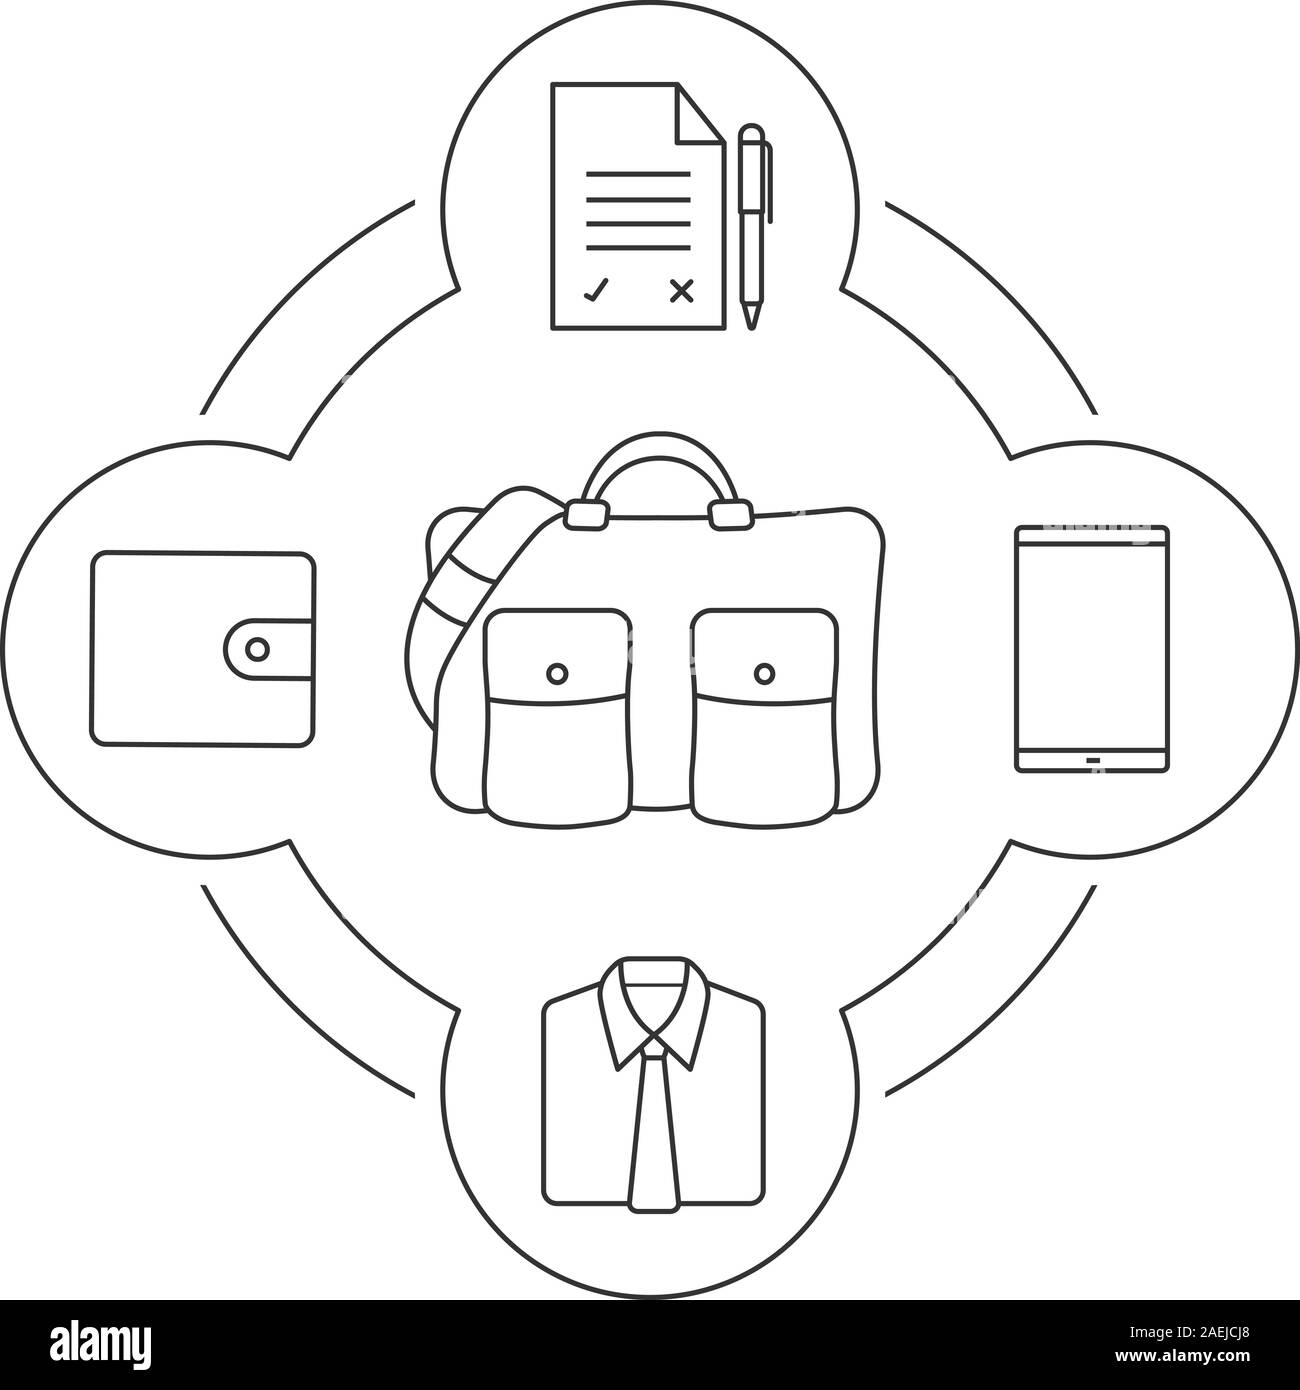 Businessman's travel bag contents linear icons set. Smartphone, contract with pen, shirt and tie, wallet. Isolated vector illustrations Stock Vector